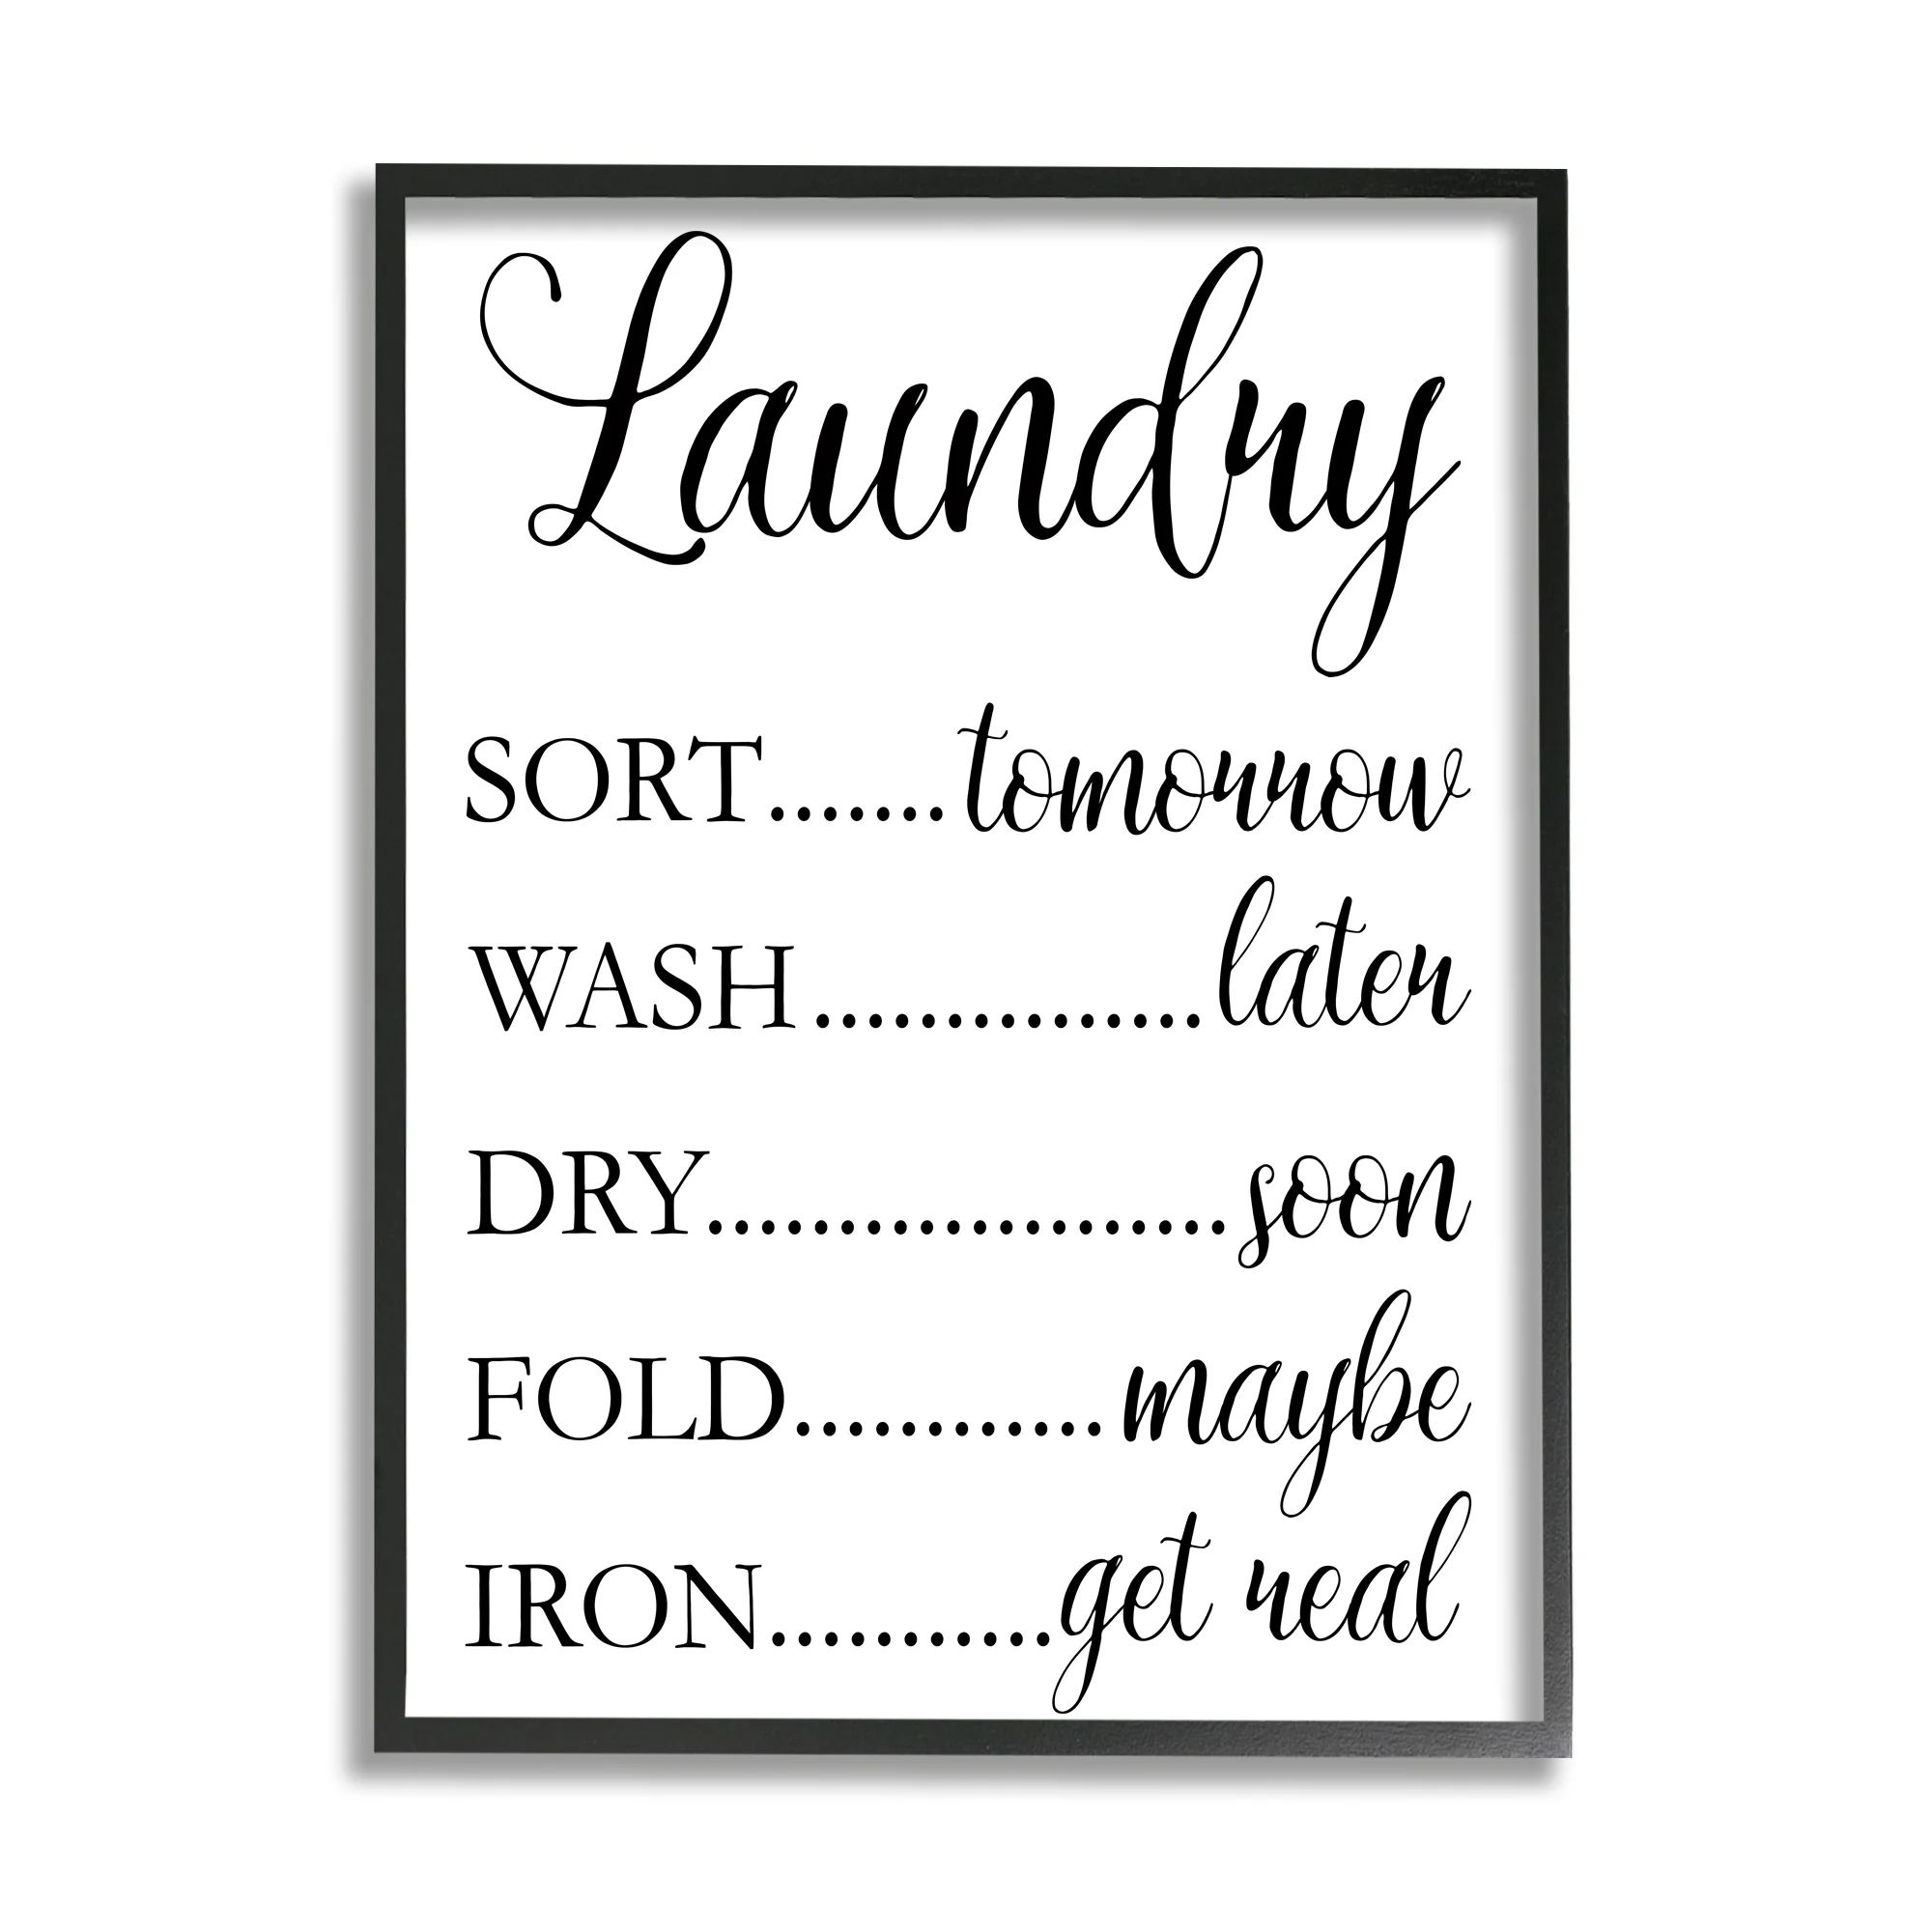 Stupell Industries Laundry Room Schedule Humorous Cleaning Priorities Black Framed Wall Art, 16 x 20 | Walmart (US)